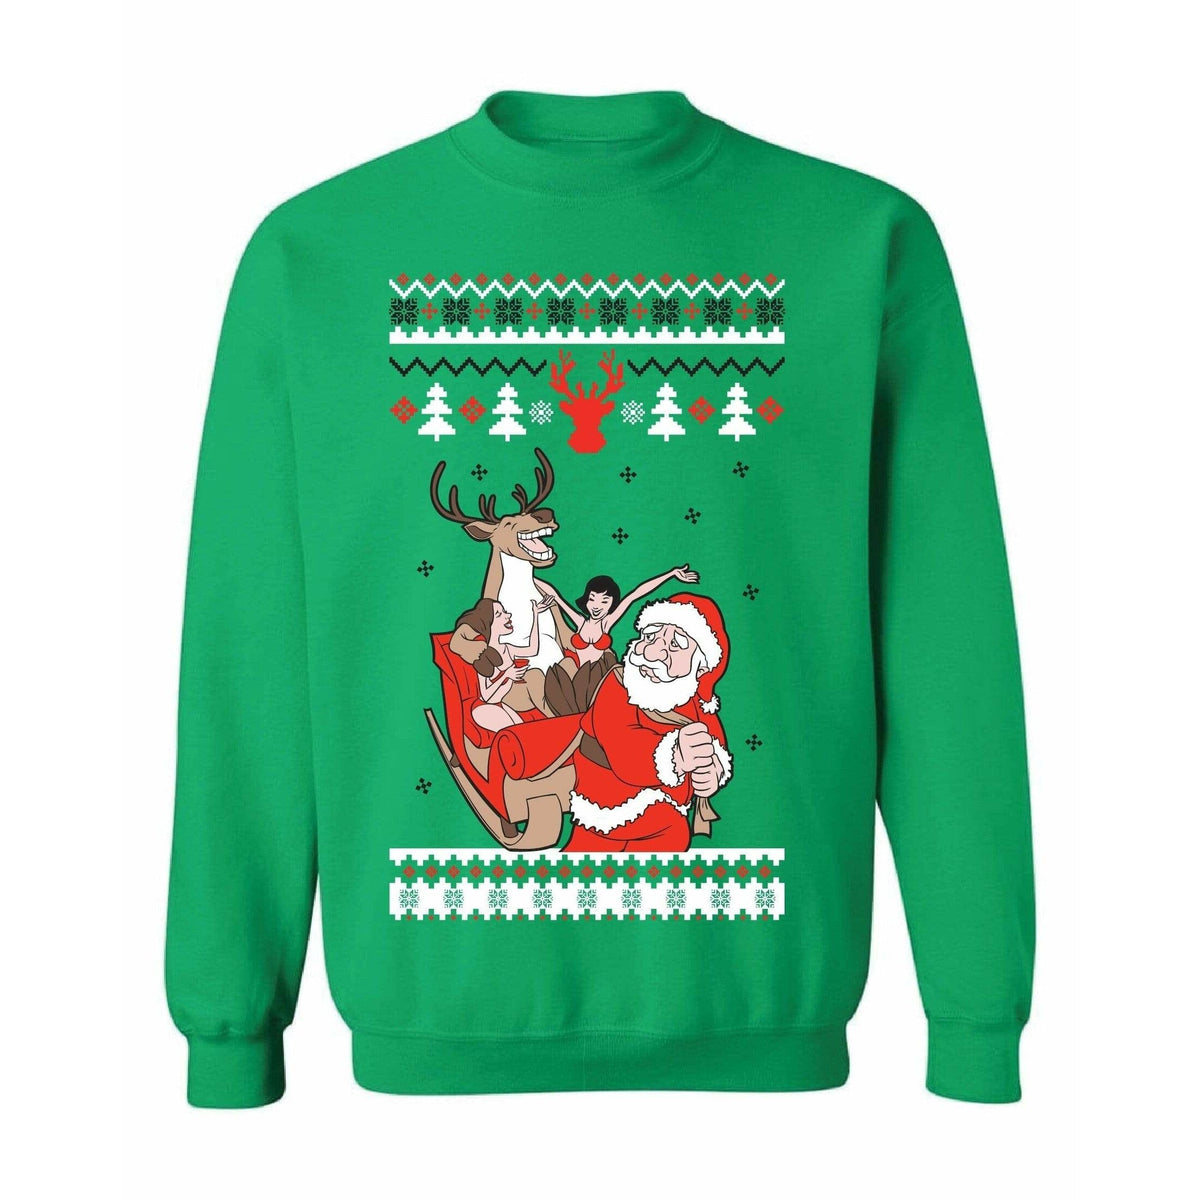 PARTY REINDEER - Green "Ugly" Christmas Sweaters Snowtorious Unisex - Small 